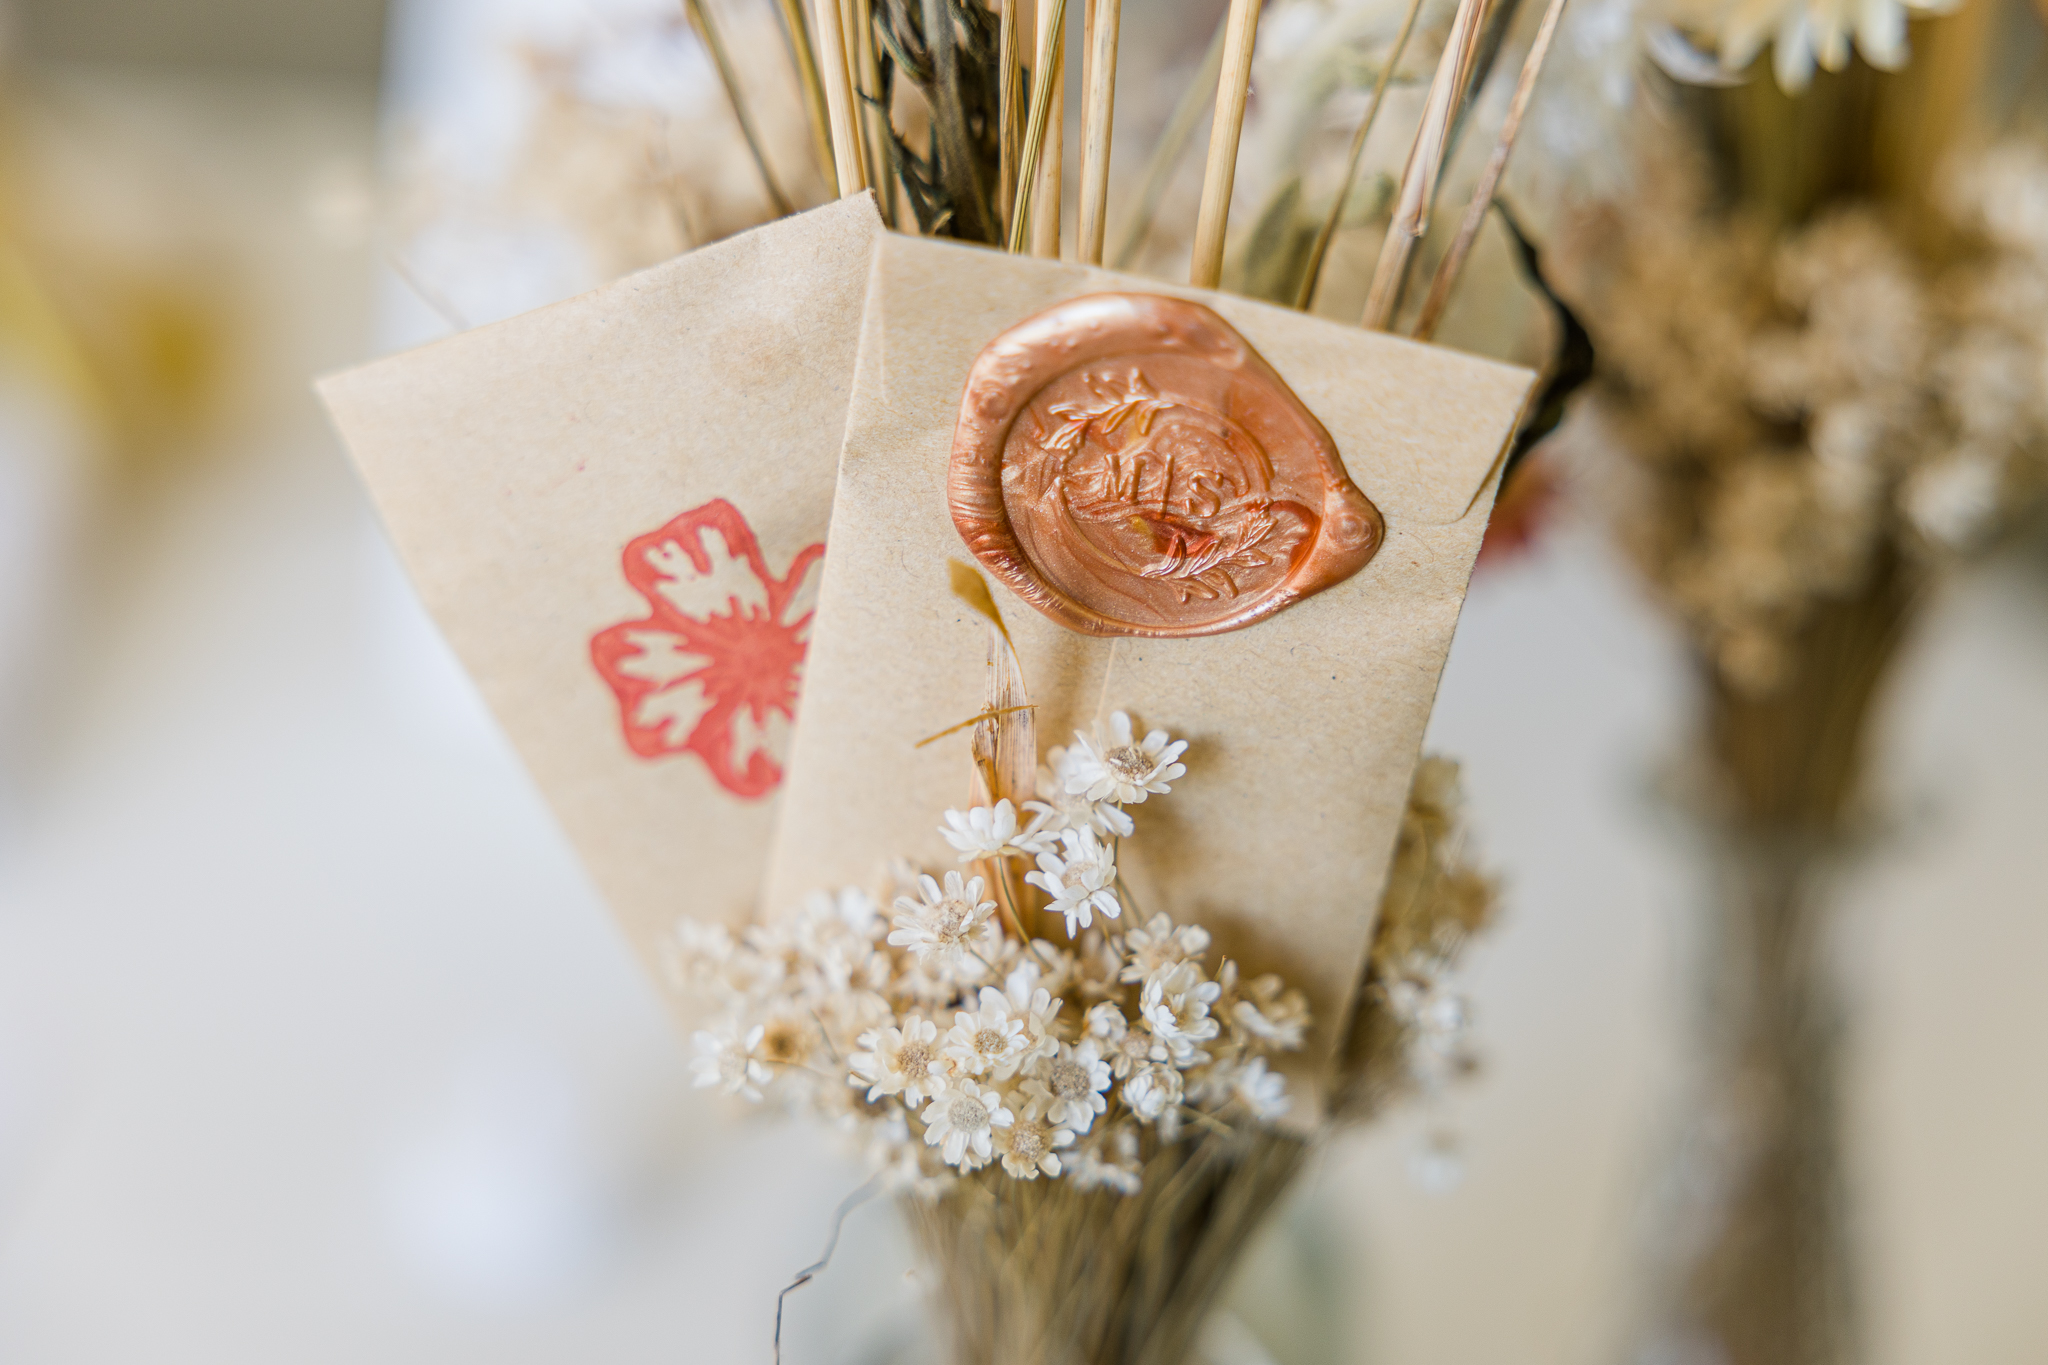 Rustic Wedding at Calico Orchards in Julian and reception at The Ole Firehouse at Lake Cuyamaca